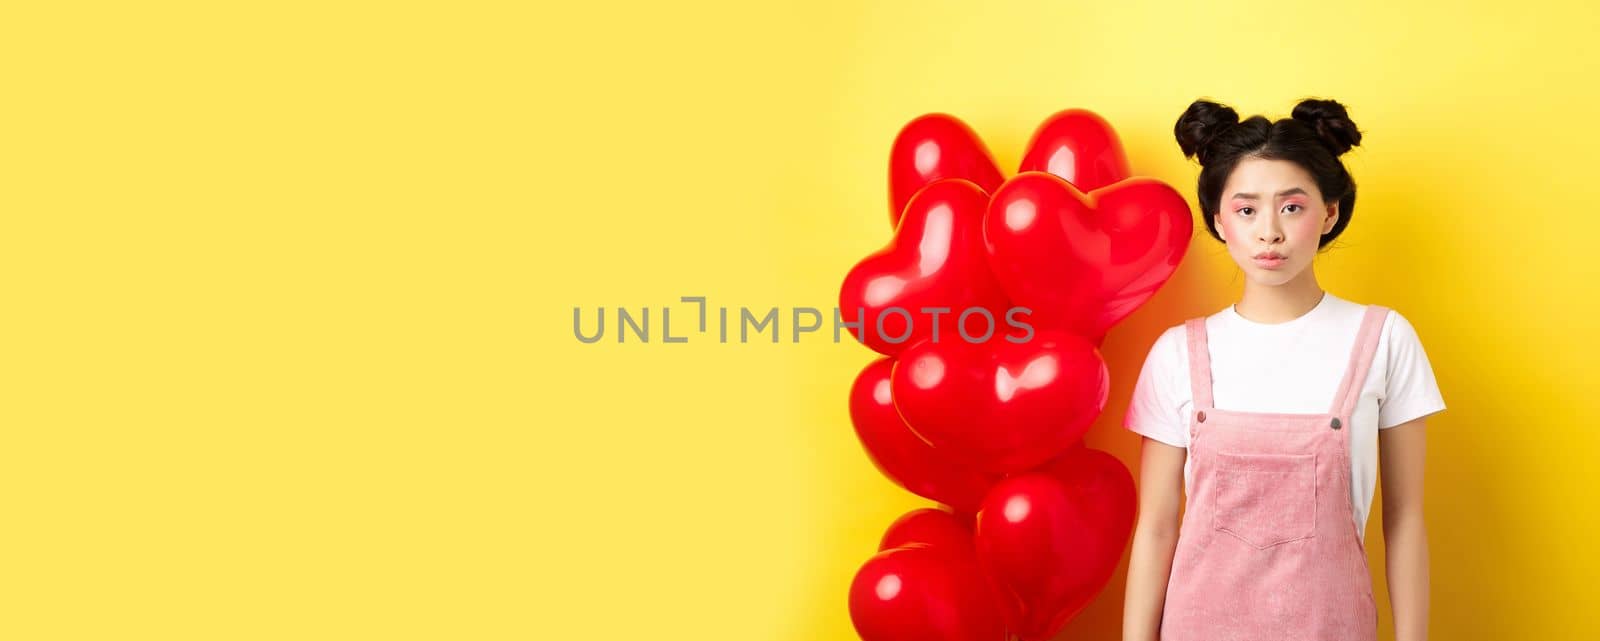 Valentines day concept. Sad and gloomy asian woman in makeup, frowning upset, standing near red hearts balloons and feeling upset, standing on yellow background.